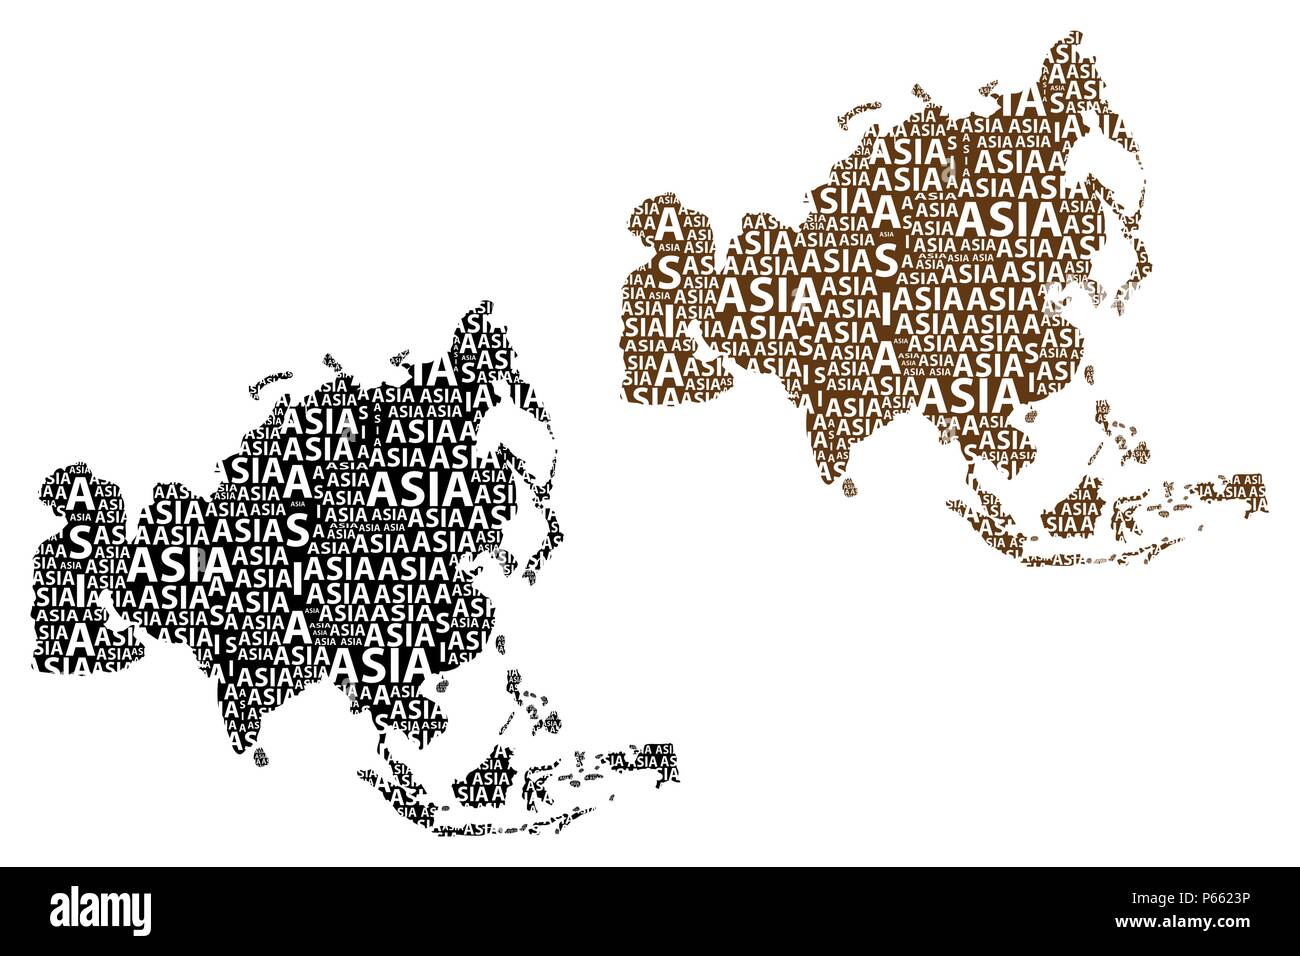 30547 Asia Map Drawing Images Stock Photos  Vectors  Shutterstock